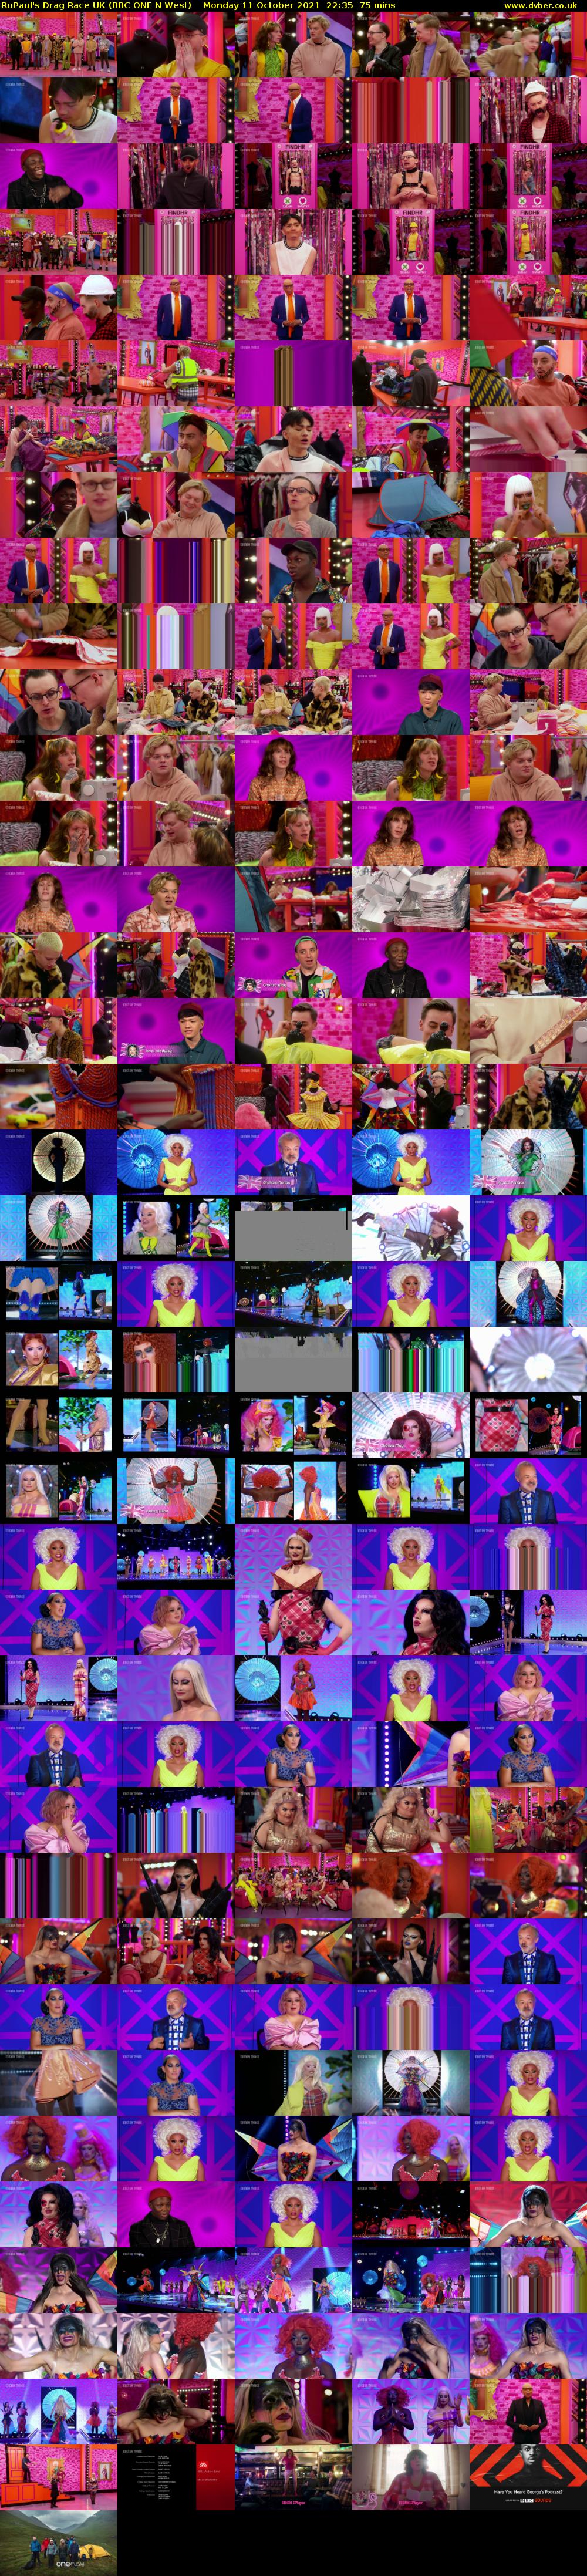 RuPaul's Drag Race UK (BBC ONE N West) Monday 11 October 2021 22:35 - 23:50